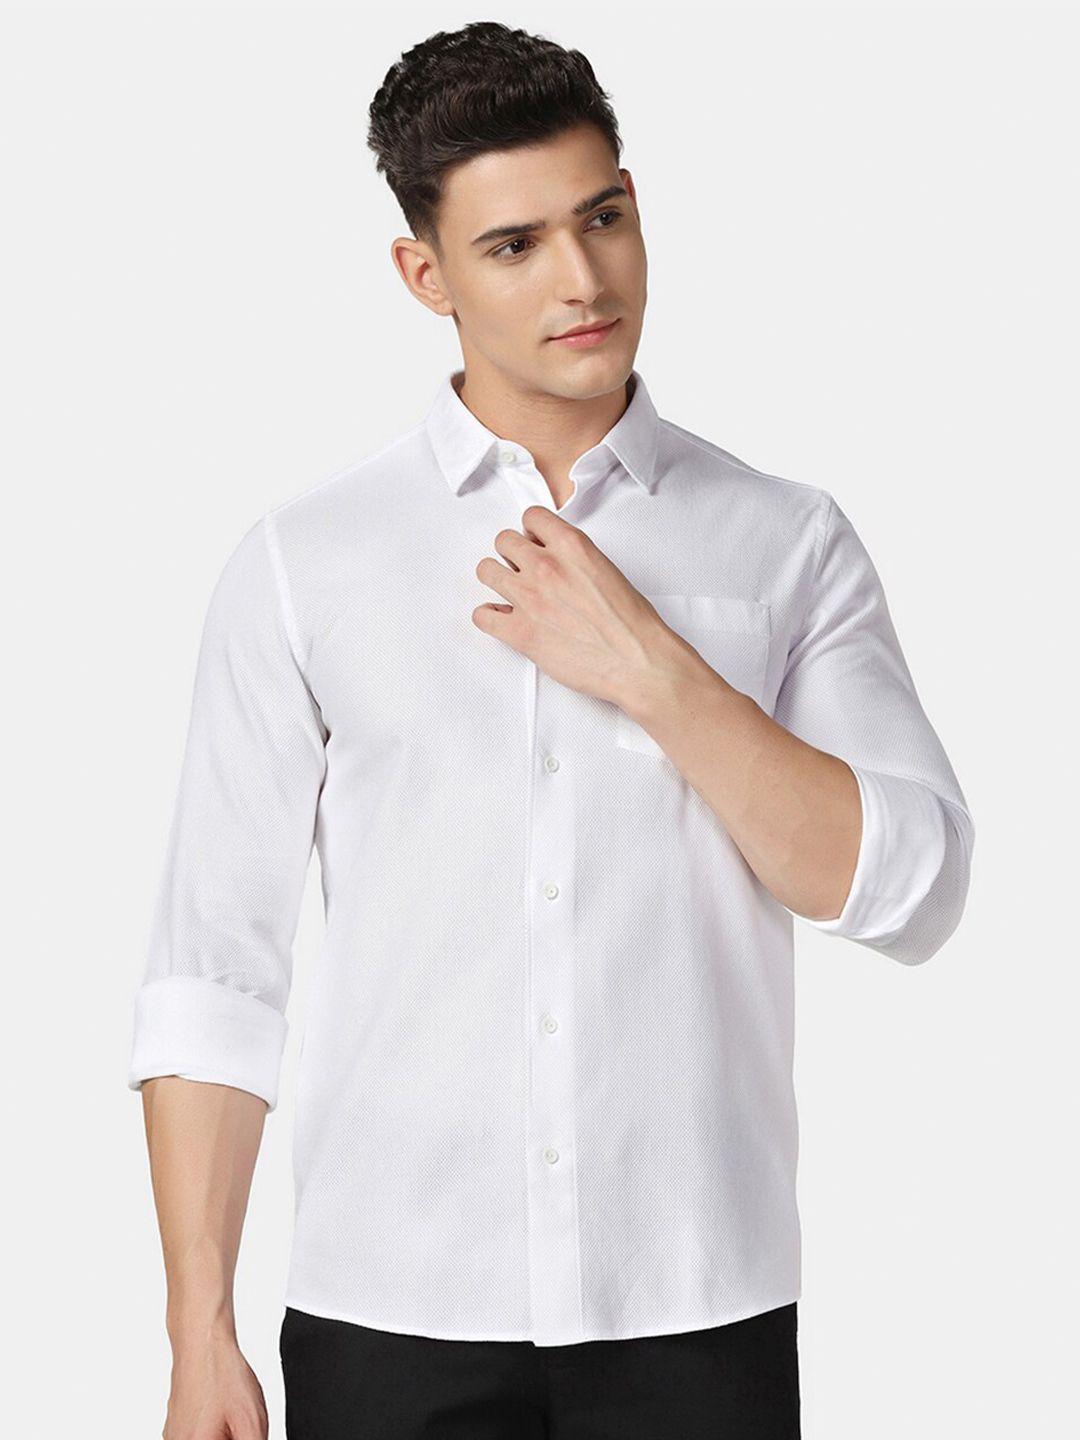 blackberrys india slim fit opaque pure cotton casual shirt